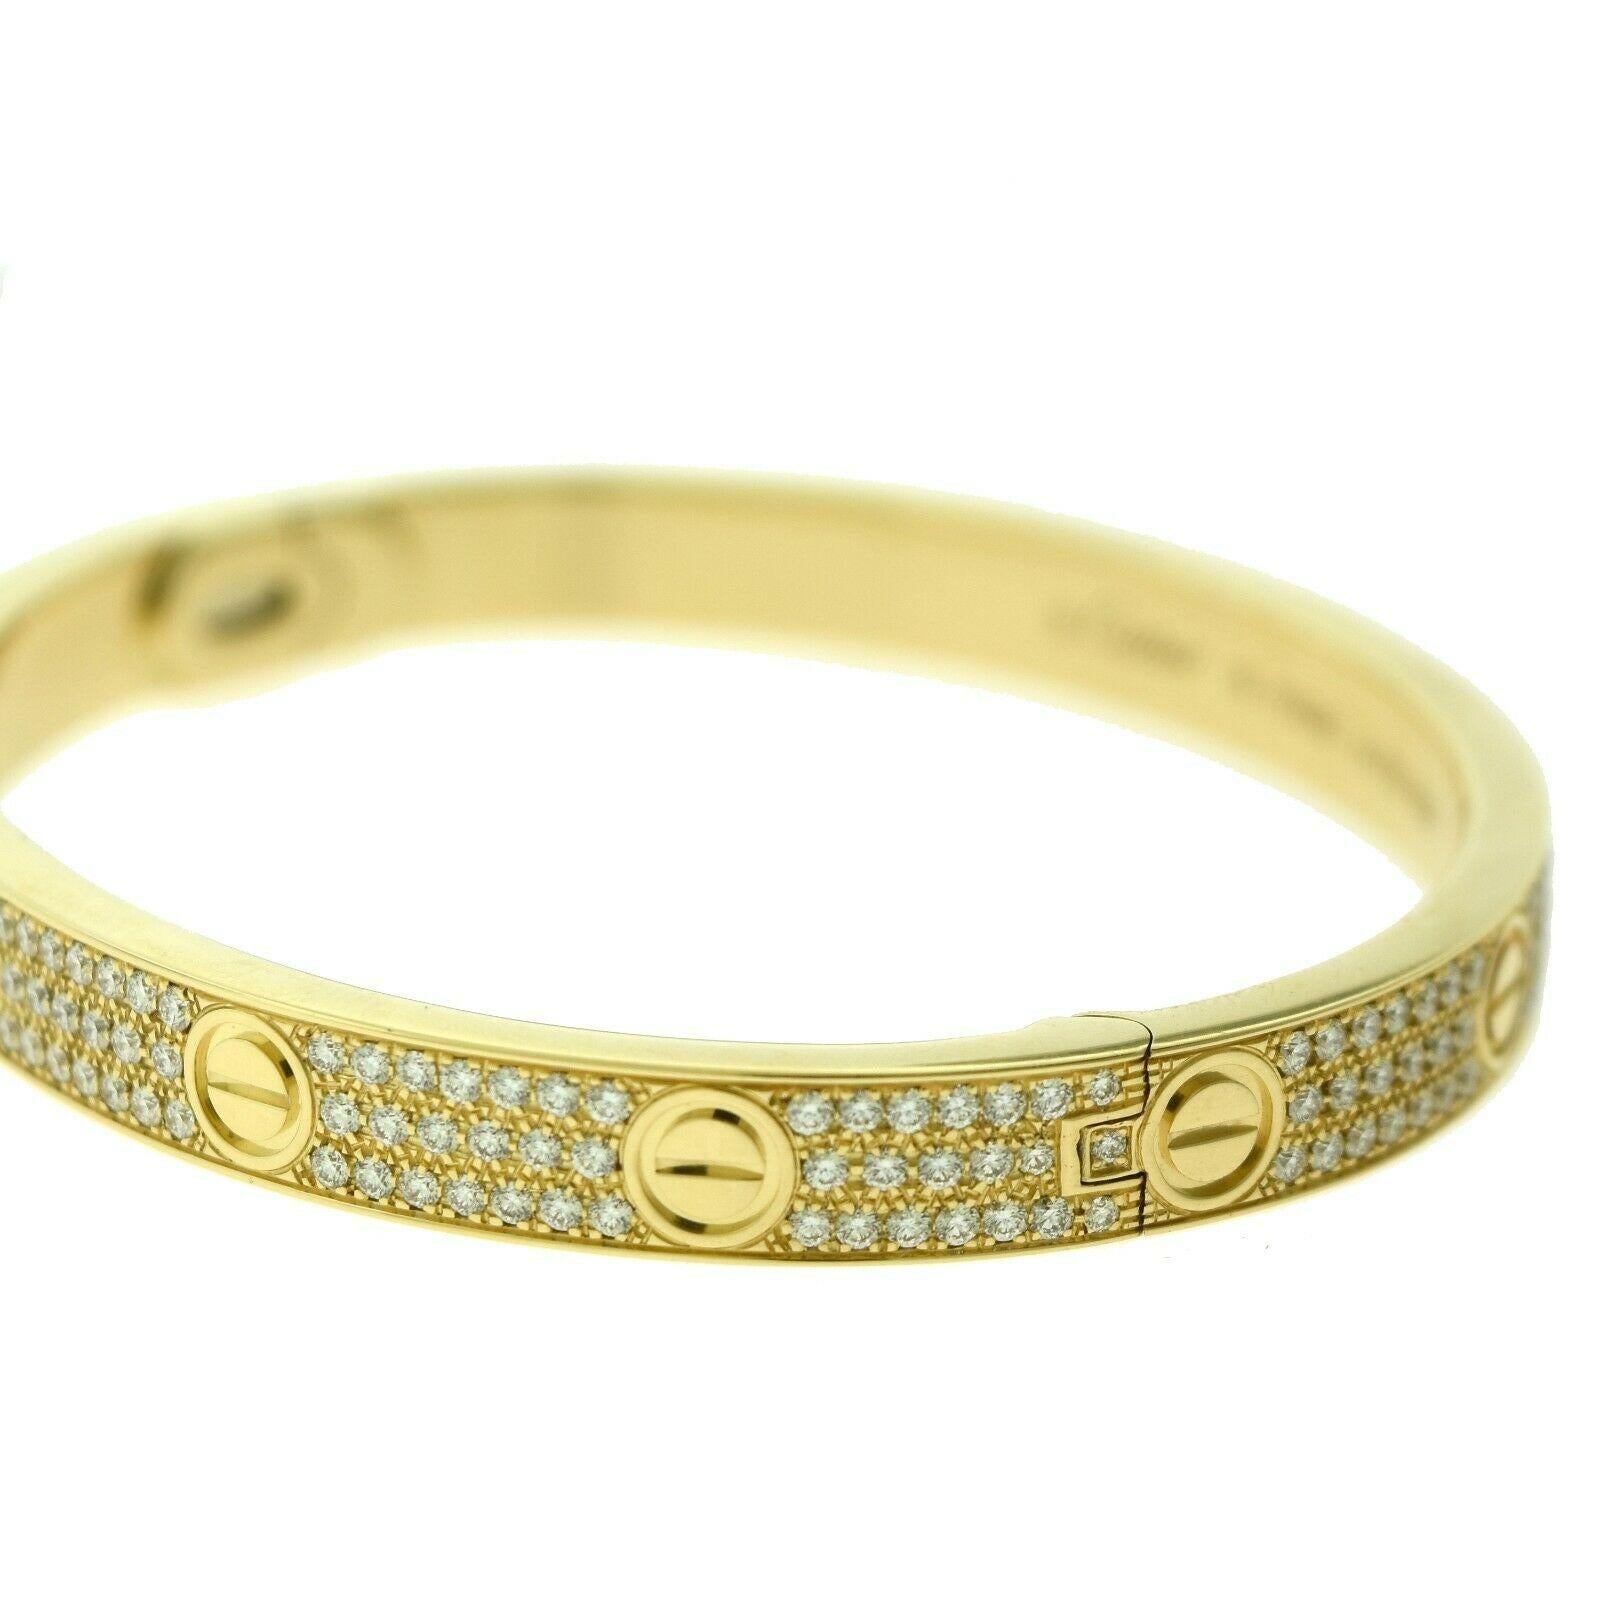 Brand New Cartier Love Bracelet Diamond-Paved in Yellow Gold For Sale ...